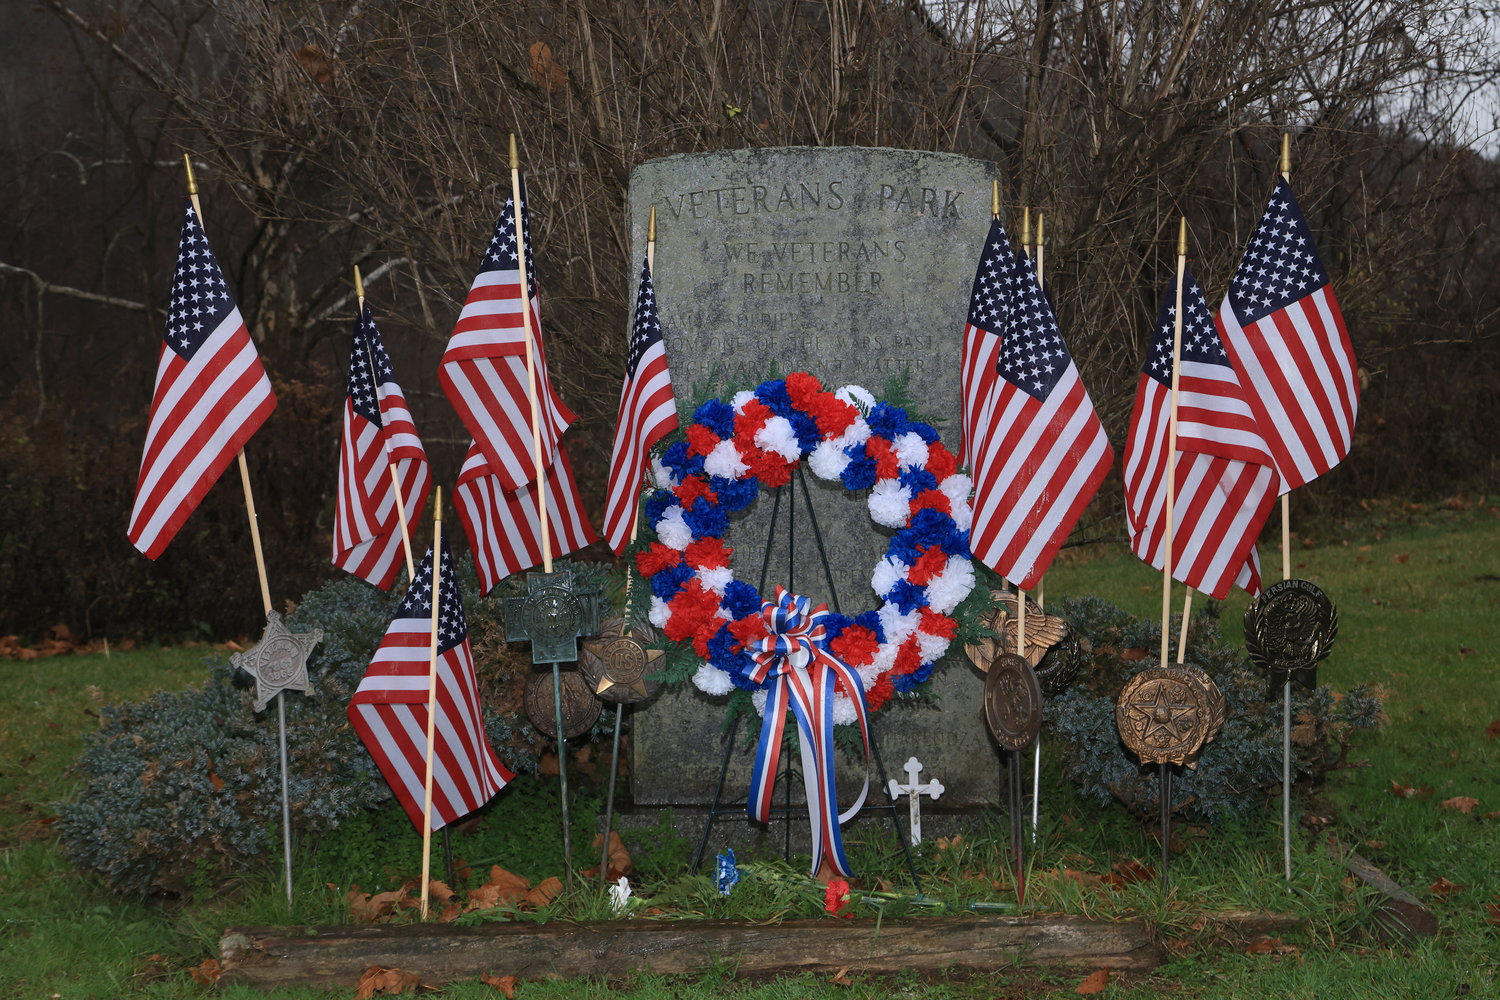 The Veterans Memorial Monument, with flags and a Veterans Day wreath, at Veterans Park, Fair Avenue, in Honesdale, PA, near the pool.